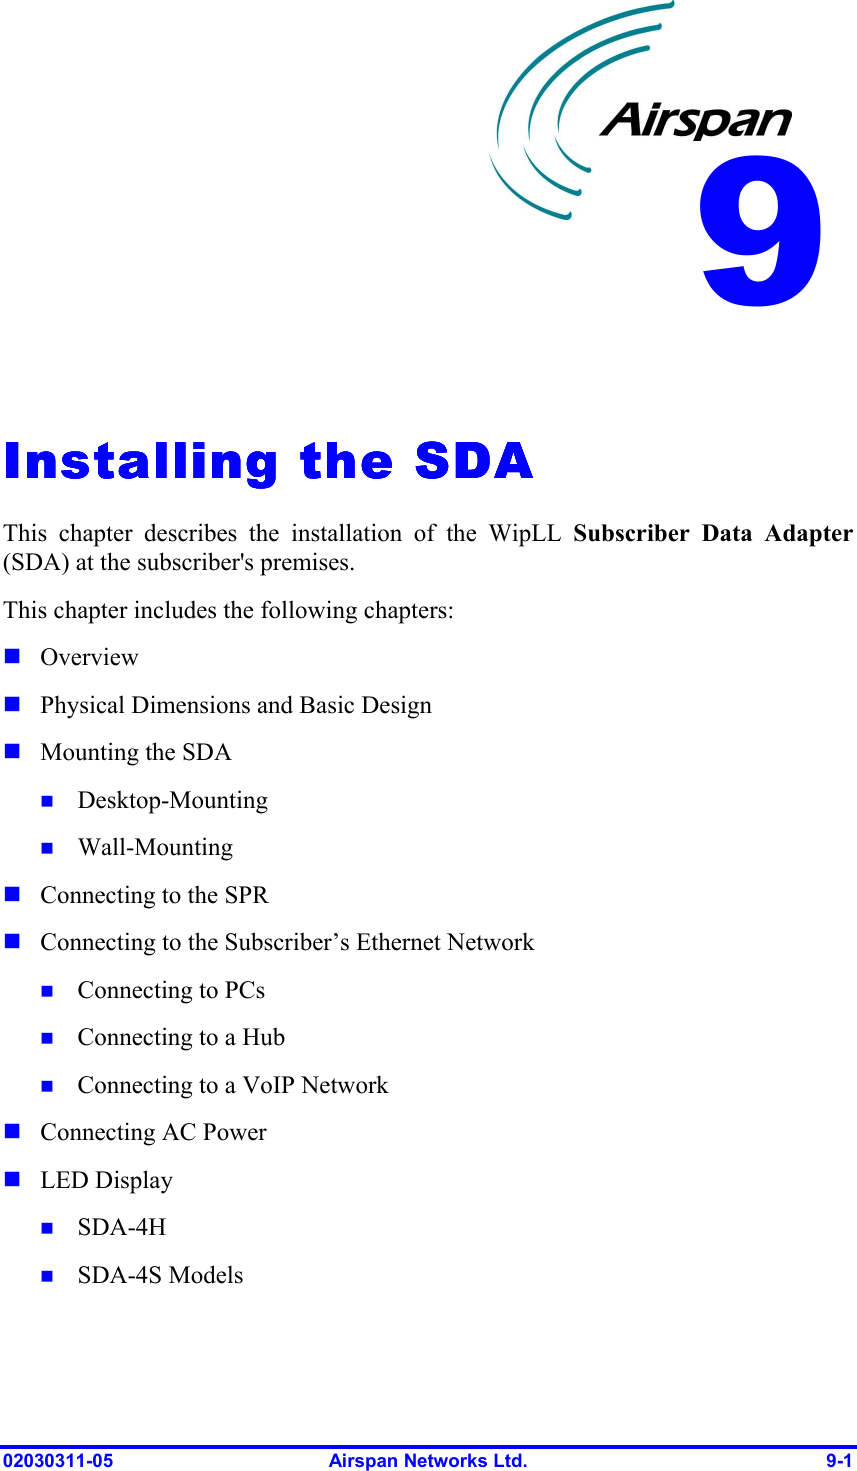  02030311-05  Airspan Networks Ltd.  9-1   Installing the SDAInstalling the SDAInstalling the SDAInstalling the SDA    This chapter describes the installation of the WipLL Subscriber Data Adapter (SDA) at the subscriber&apos;s premises.  This chapter includes the following chapters: ! Overview ! Physical Dimensions and Basic Design ! Mounting the SDA !  Desktop-Mounting !  Wall-Mounting ! Connecting to the SPR ! Connecting to the Subscriber’s Ethernet Network !  Connecting to PCs !  Connecting to a Hub !  Connecting to a VoIP Network ! Connecting AC Power ! LED Display !  SDA-4H !  SDA-4S Models 9 